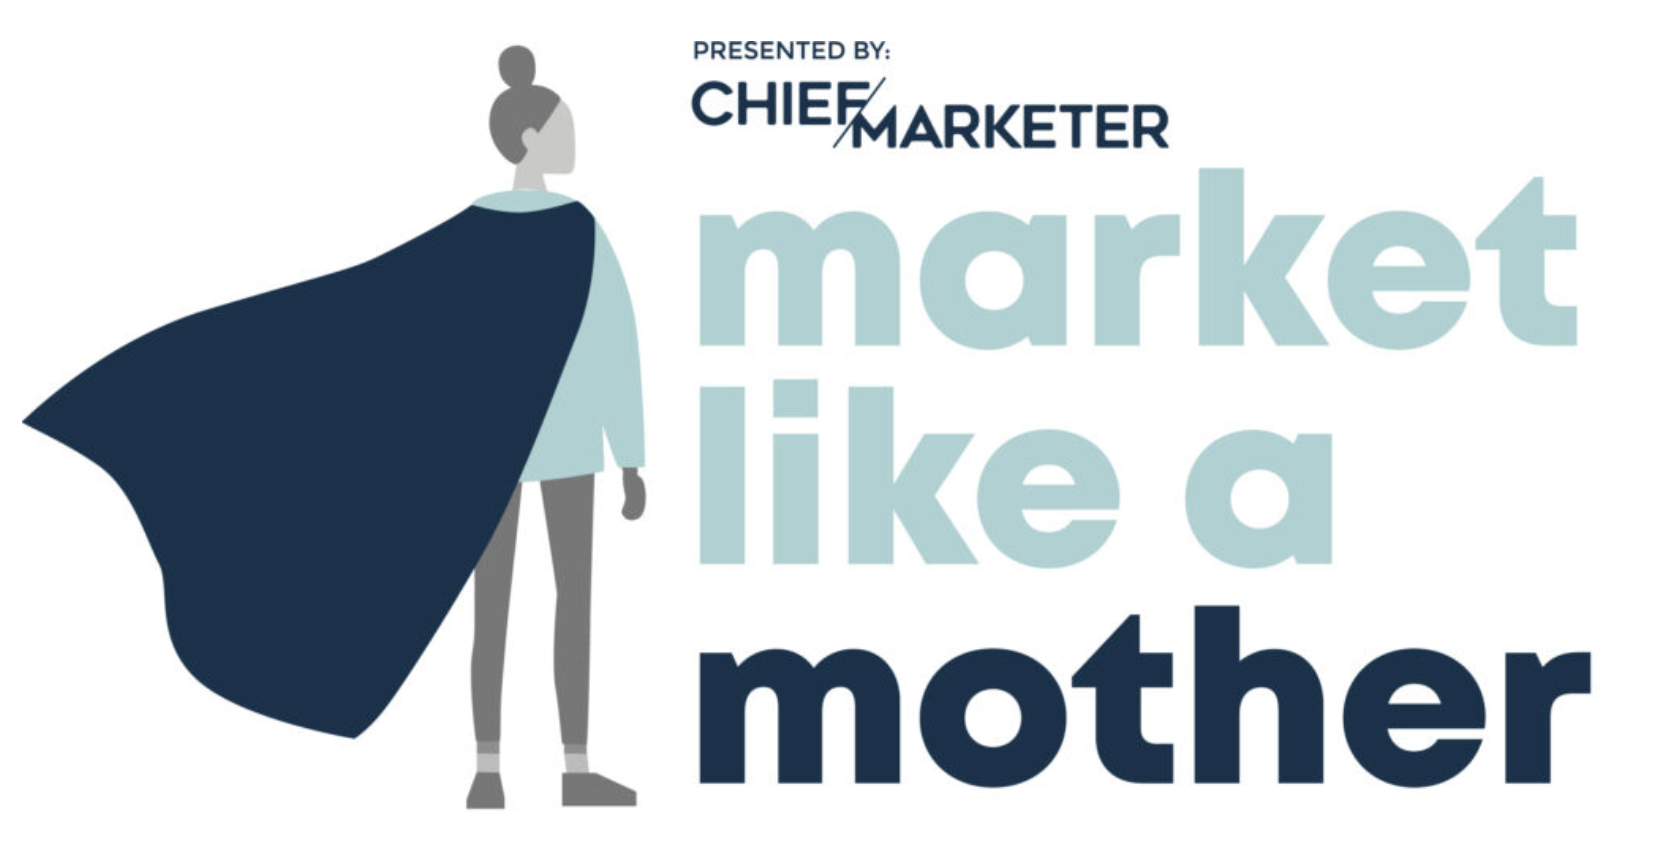 Cuthbert selected for Chief Marketer ‘Market Like A Mother’ Award